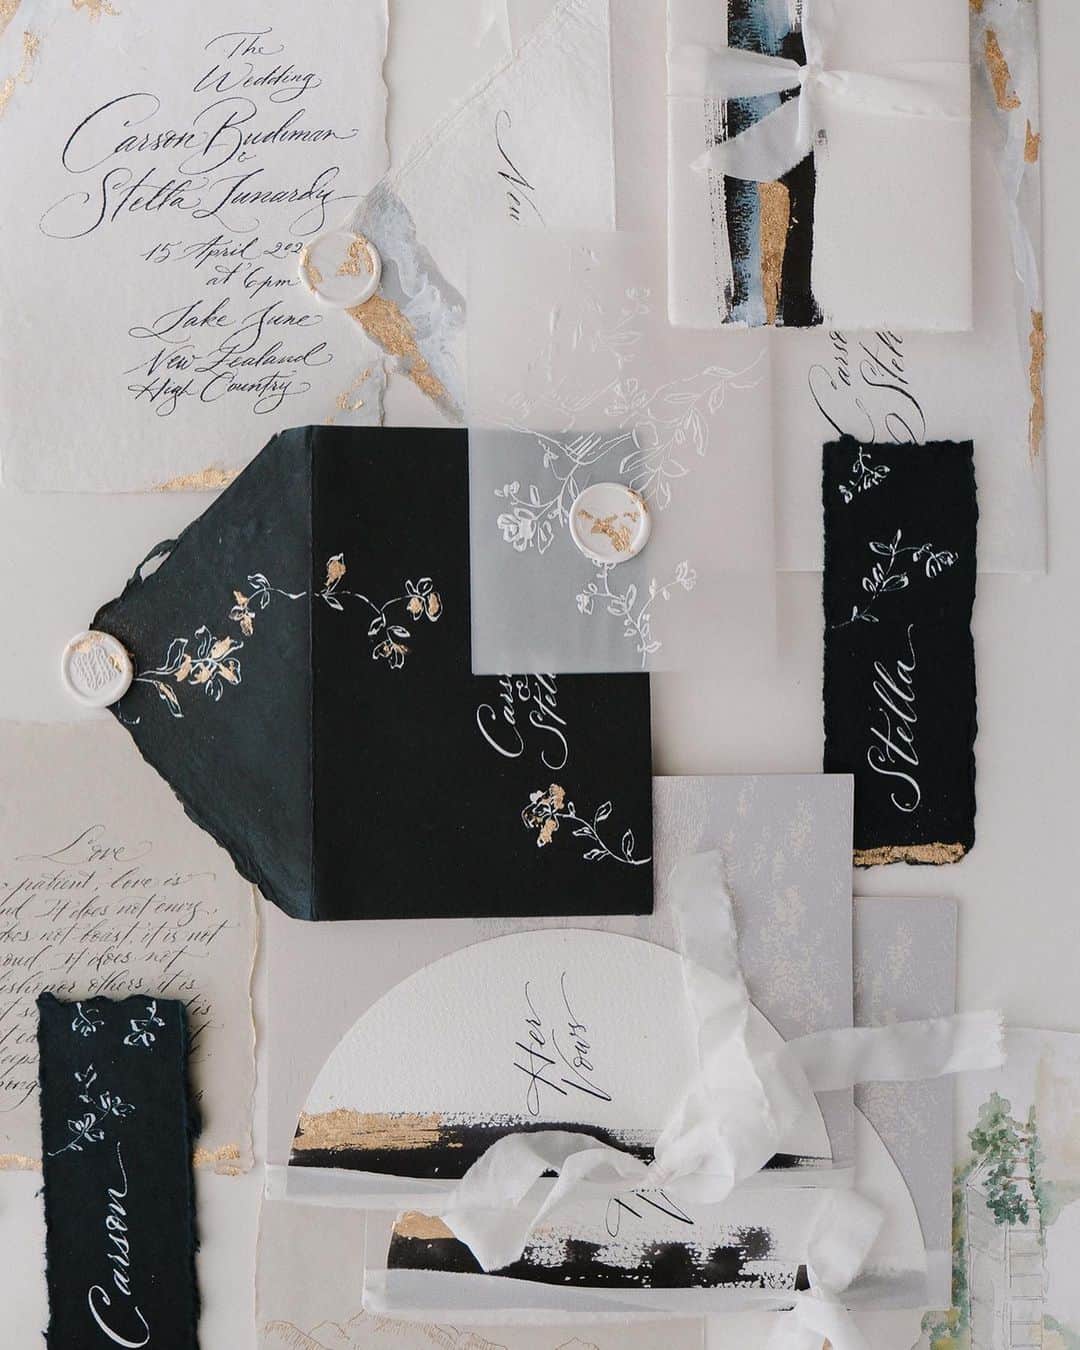 Veronica Halimのインスタグラム：「All-time favorite color palette: black, white, grey, and gold. This handmade keepsake bundle was created for Stella and Carson. Loving all the hand-painted texture against black, which makes it so chic! — #truffypi #カリグラフィー #カリグラフィースタイリング #モダンカリグラフィー #calligraphystyling #painting #weddingstationery #moderncalligraphy #handmadepaper  #paperlovers #ウェディング #ウェディングアイテム #カリグラファ #veronicahalim #スタイリング #prettypapers #weddingsuite #styledshootbundle  #ldvh」